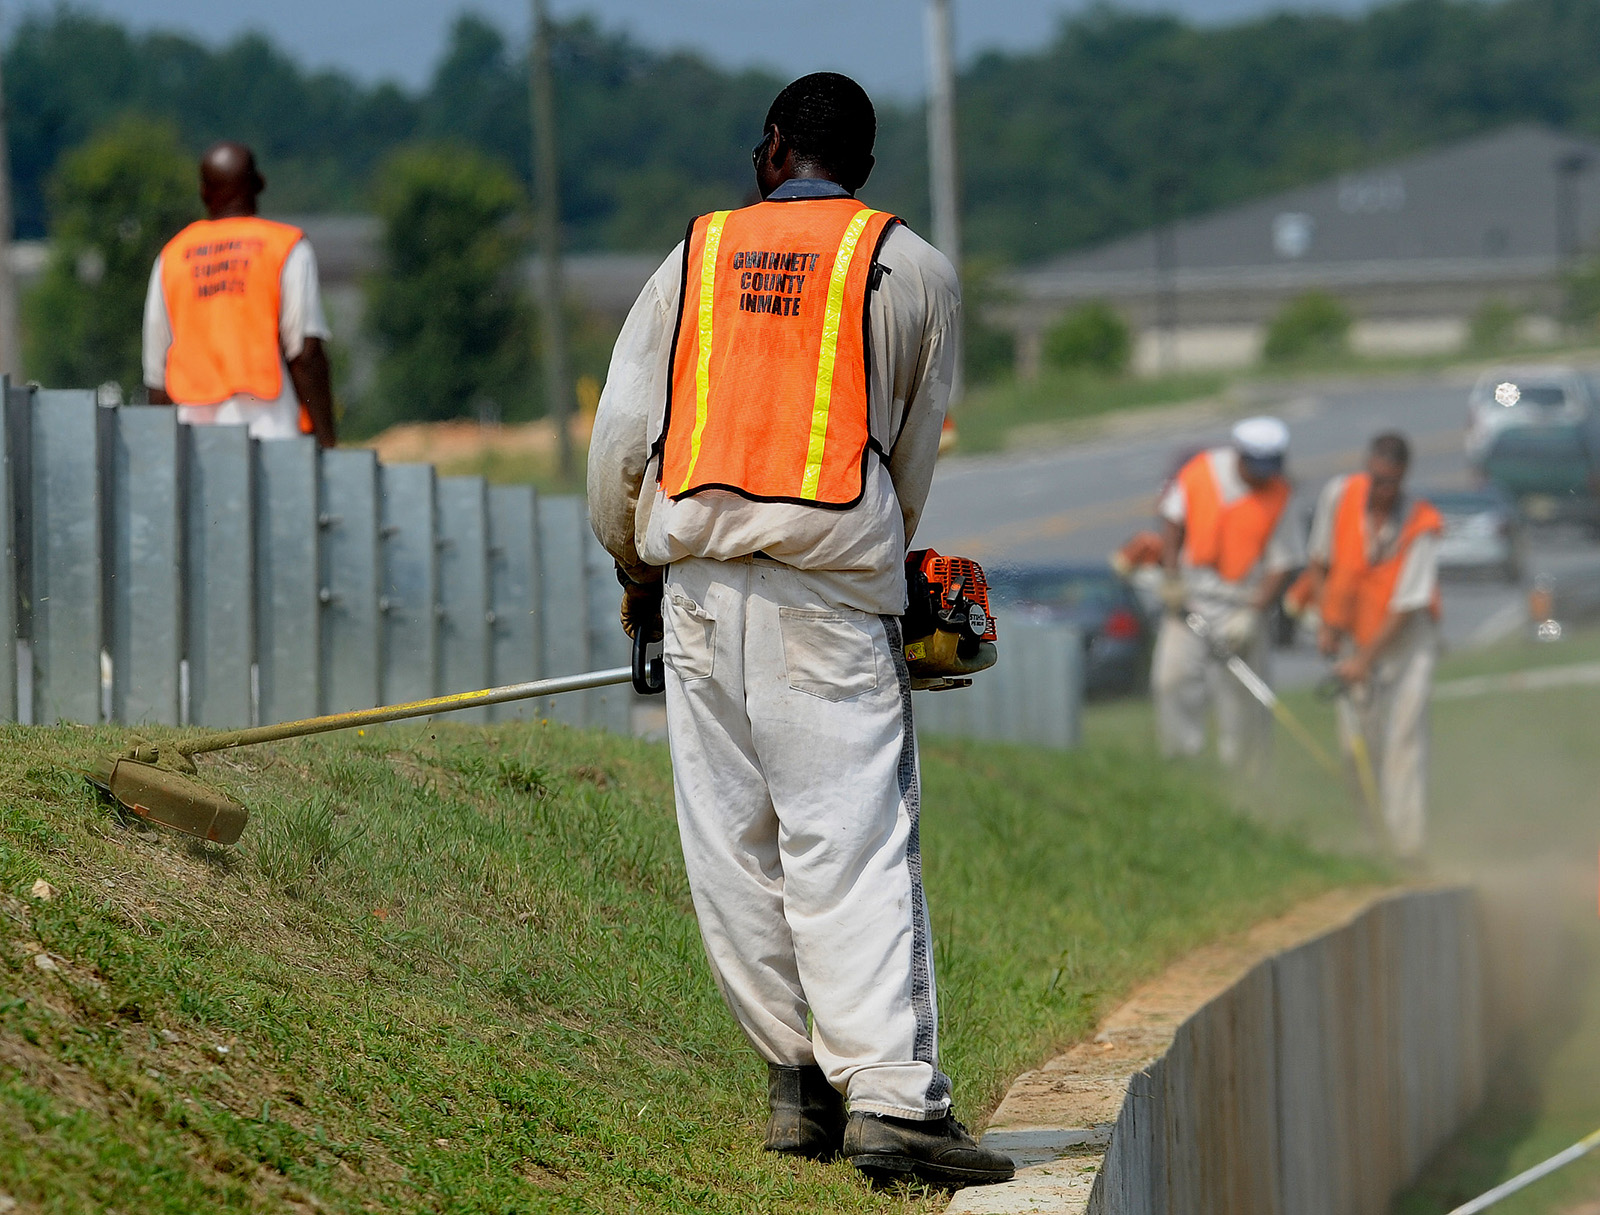 prison laborer working on the side of the road